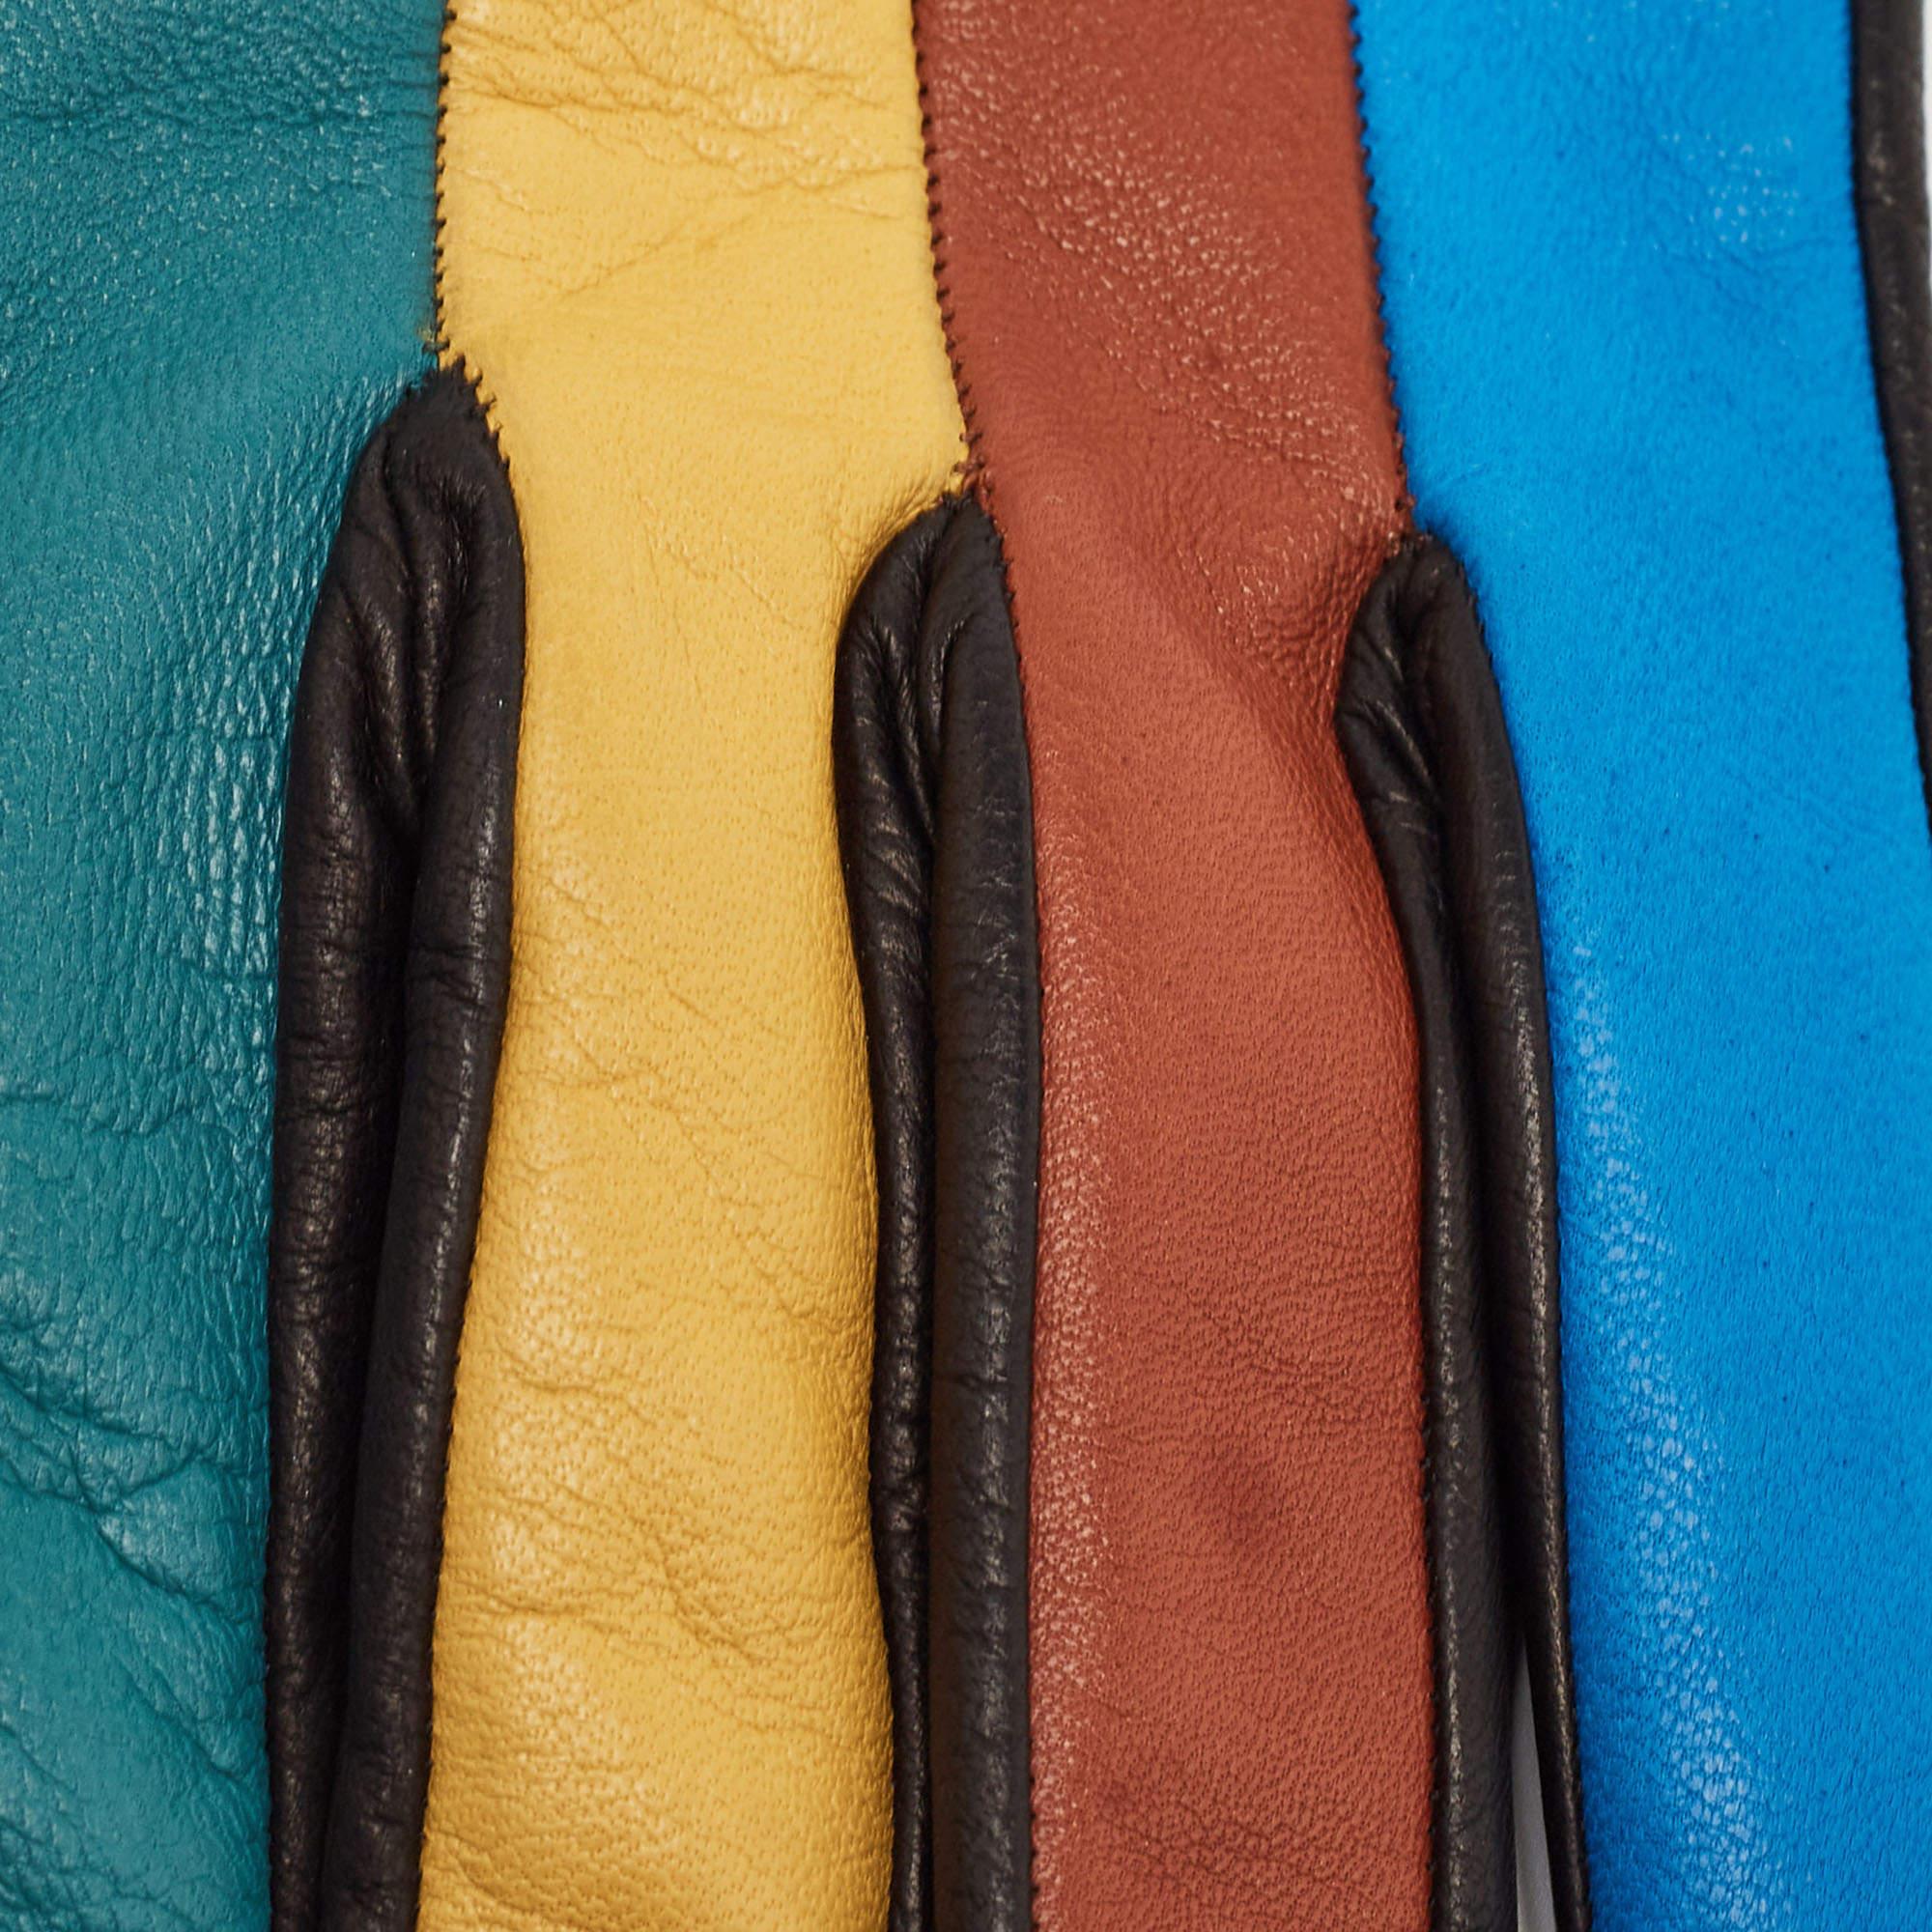 Crafted from supple leather, the Missoni gloves are a fusion of luxury and style. Vivid hues converge in precise blocks, adding a pop of color to winter ensembles. With a snug fit and exquisite craftsmanship, they effortlessly blend fashion and